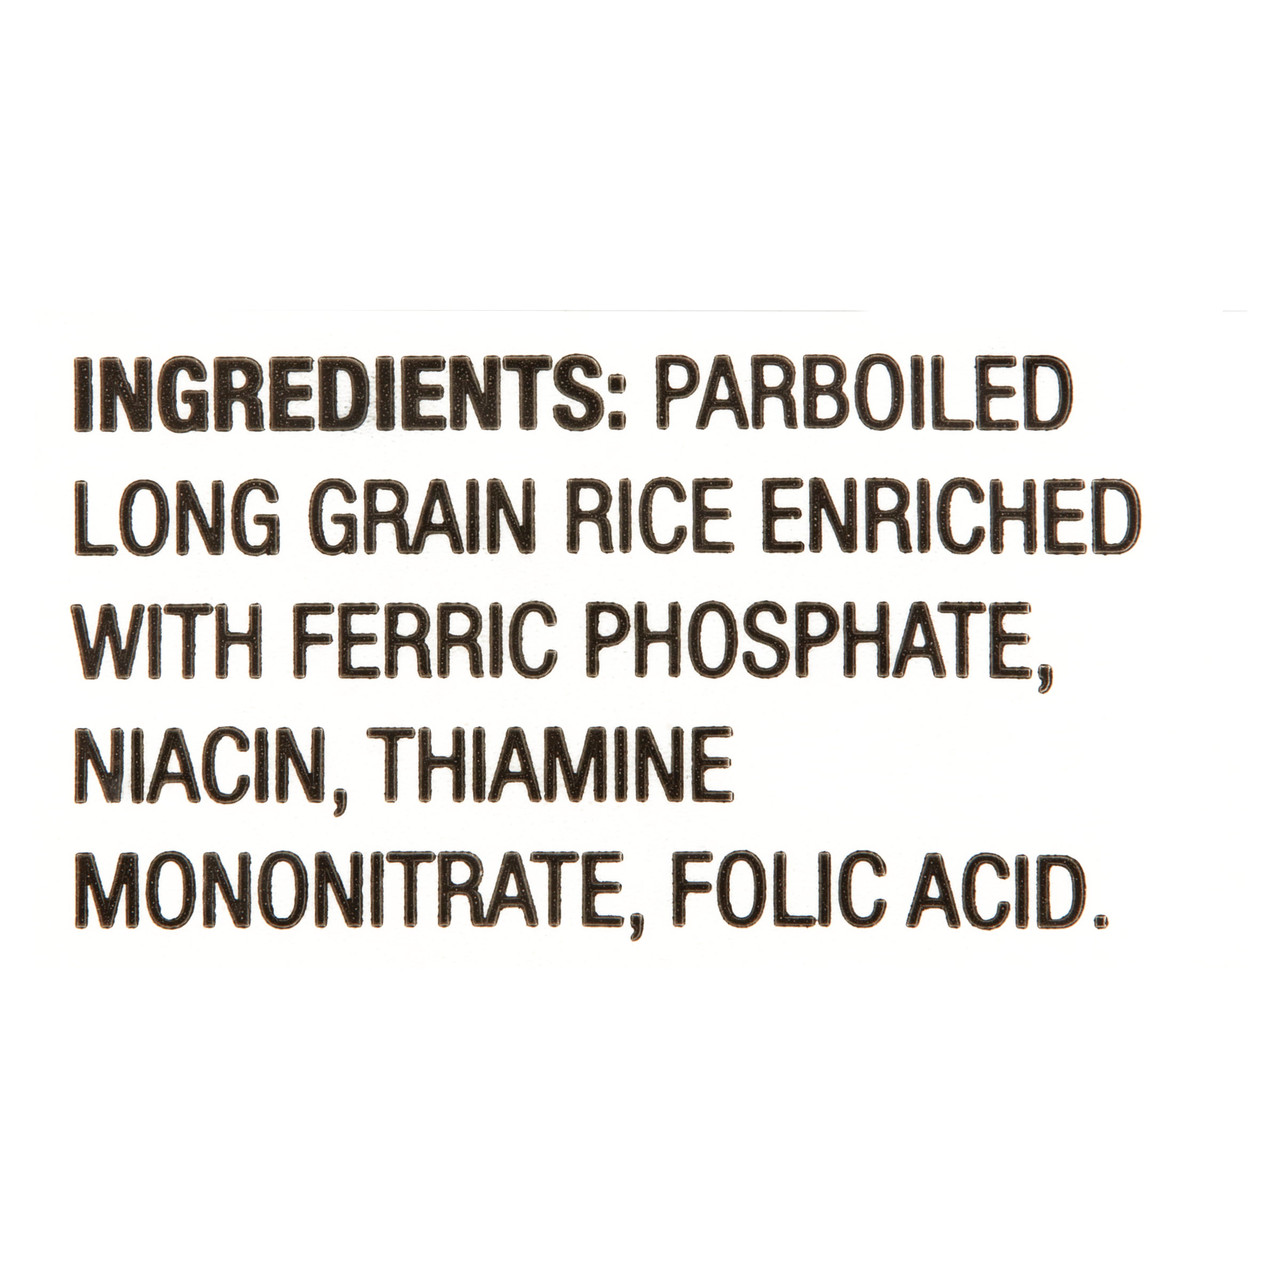 Great Value Long Grain Parboiled Enriched Rice, 32 oz - [From 11.00 - Choose pk Qty ] - *Ships from Miami